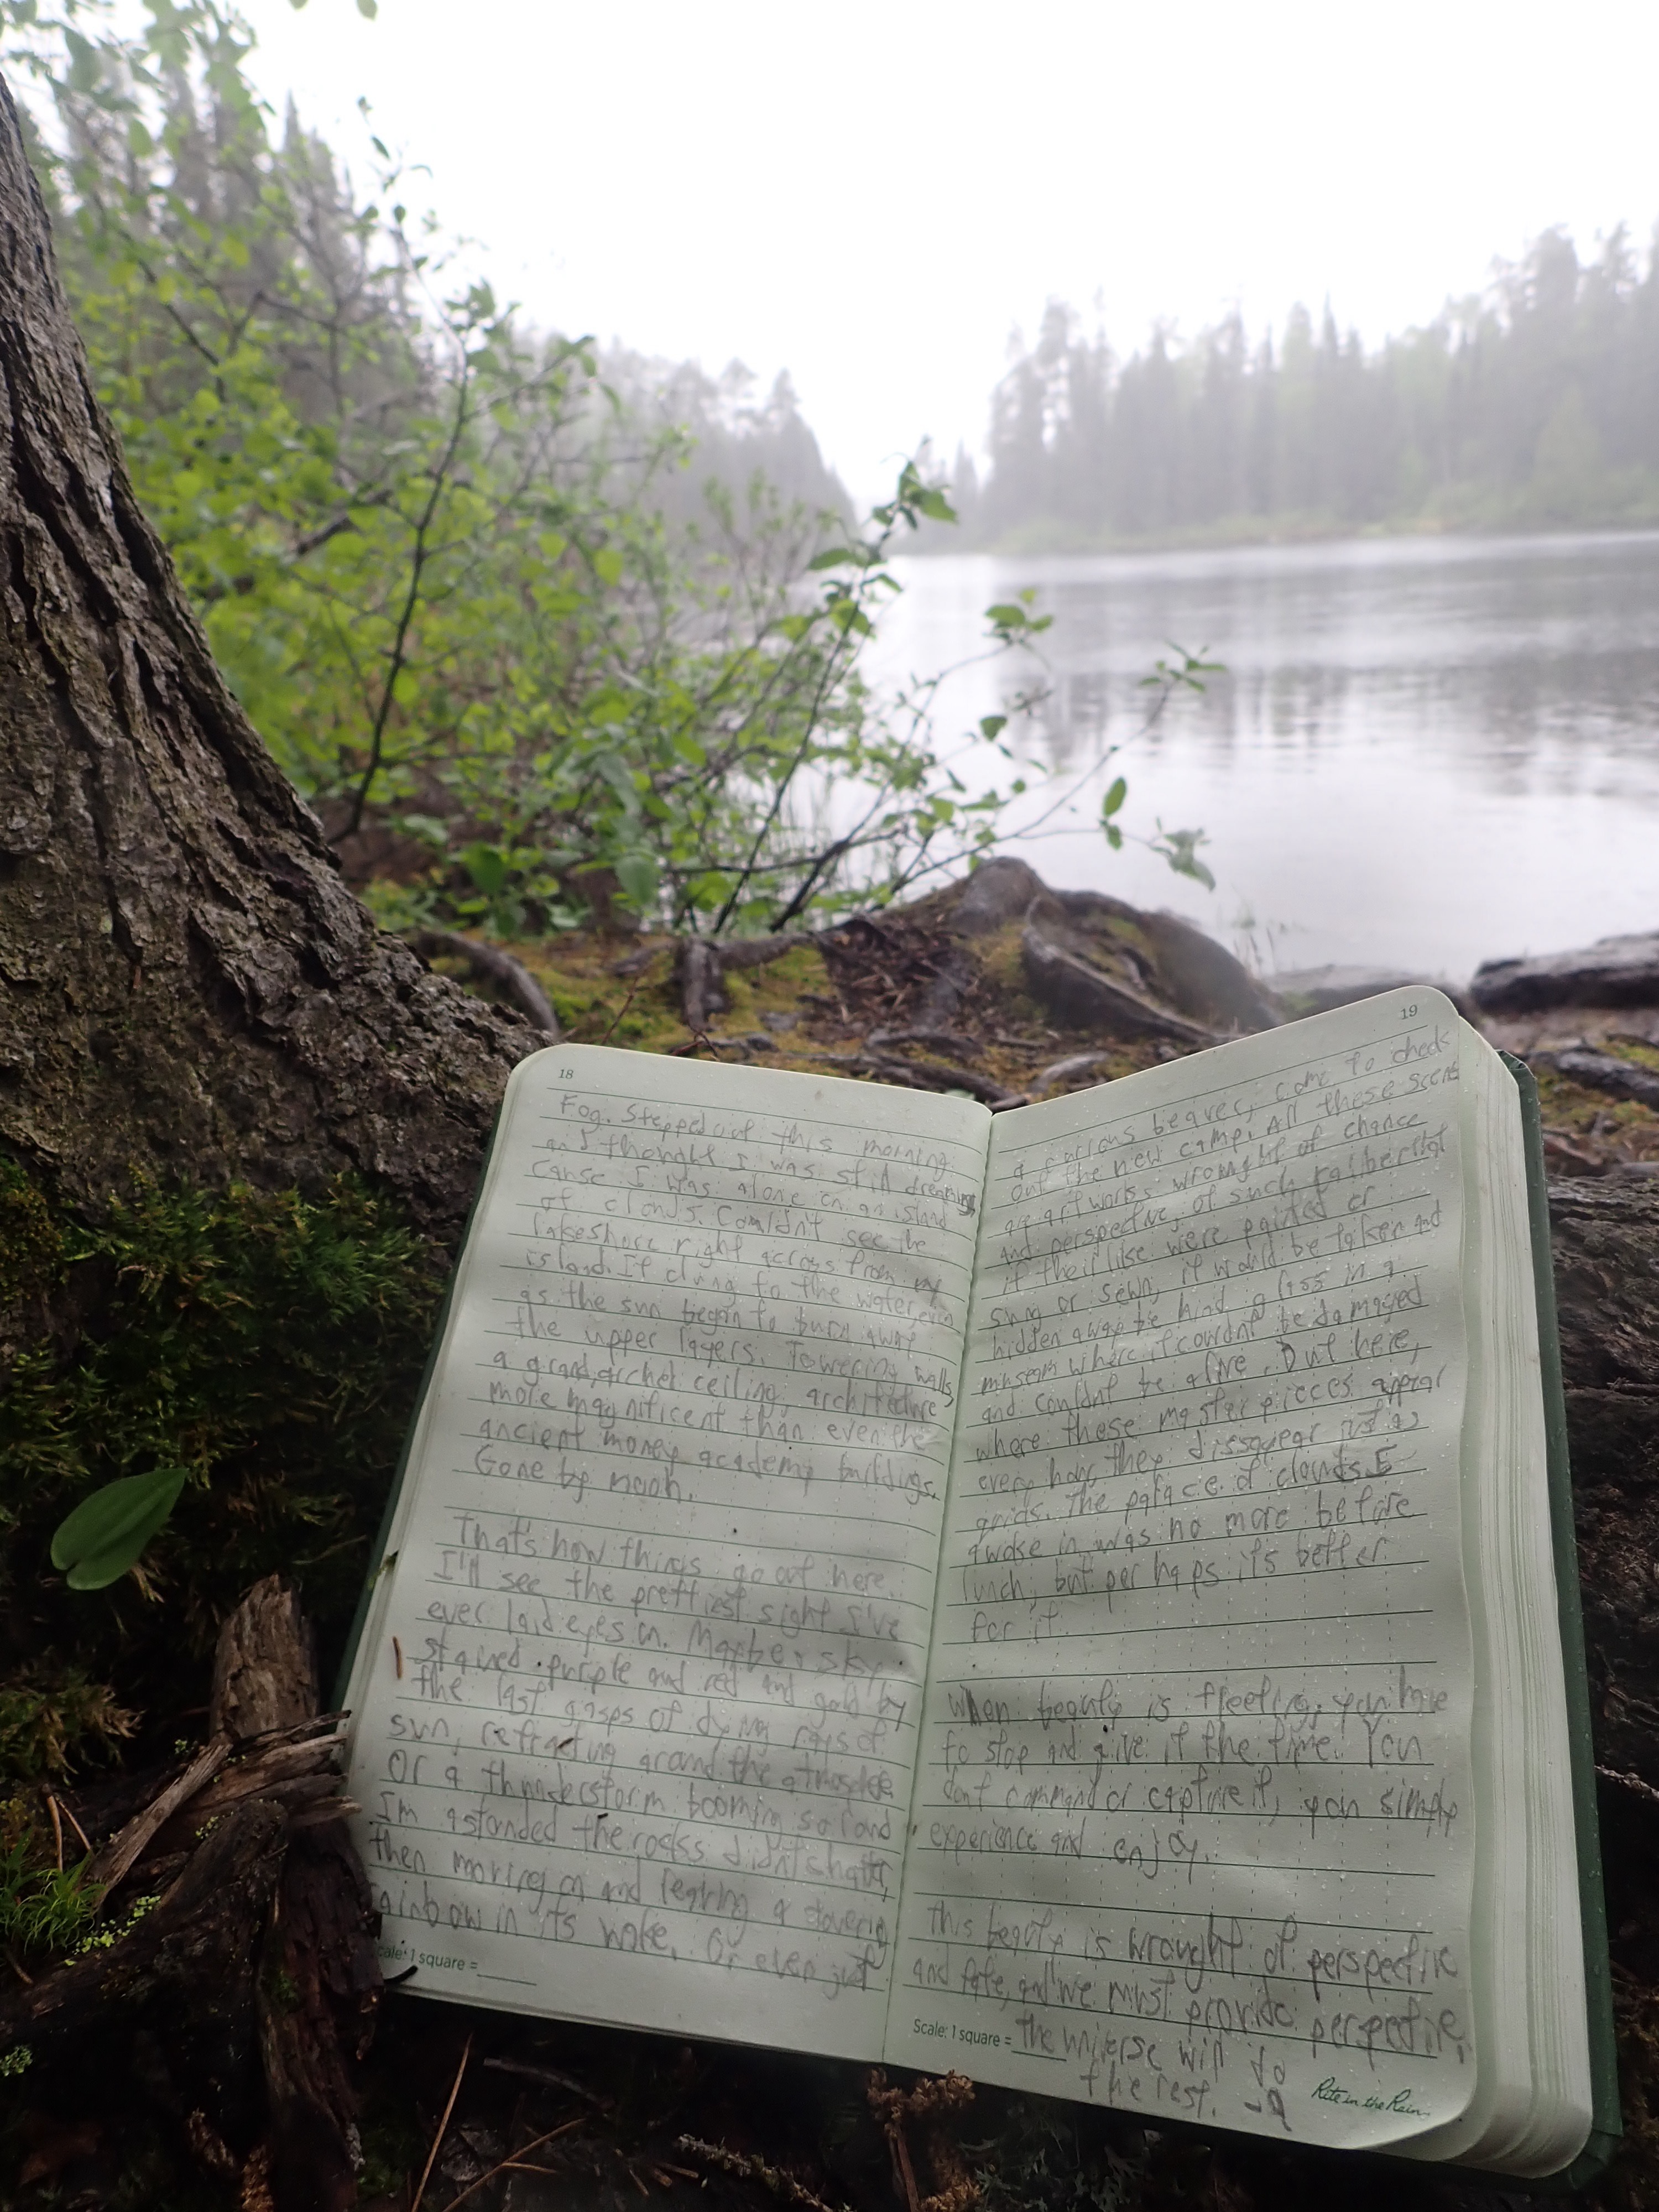 a picture of a notebook resting against a tree root, overlooking a lake and pine trees obscured by fog. written in the notebook are the above contents.